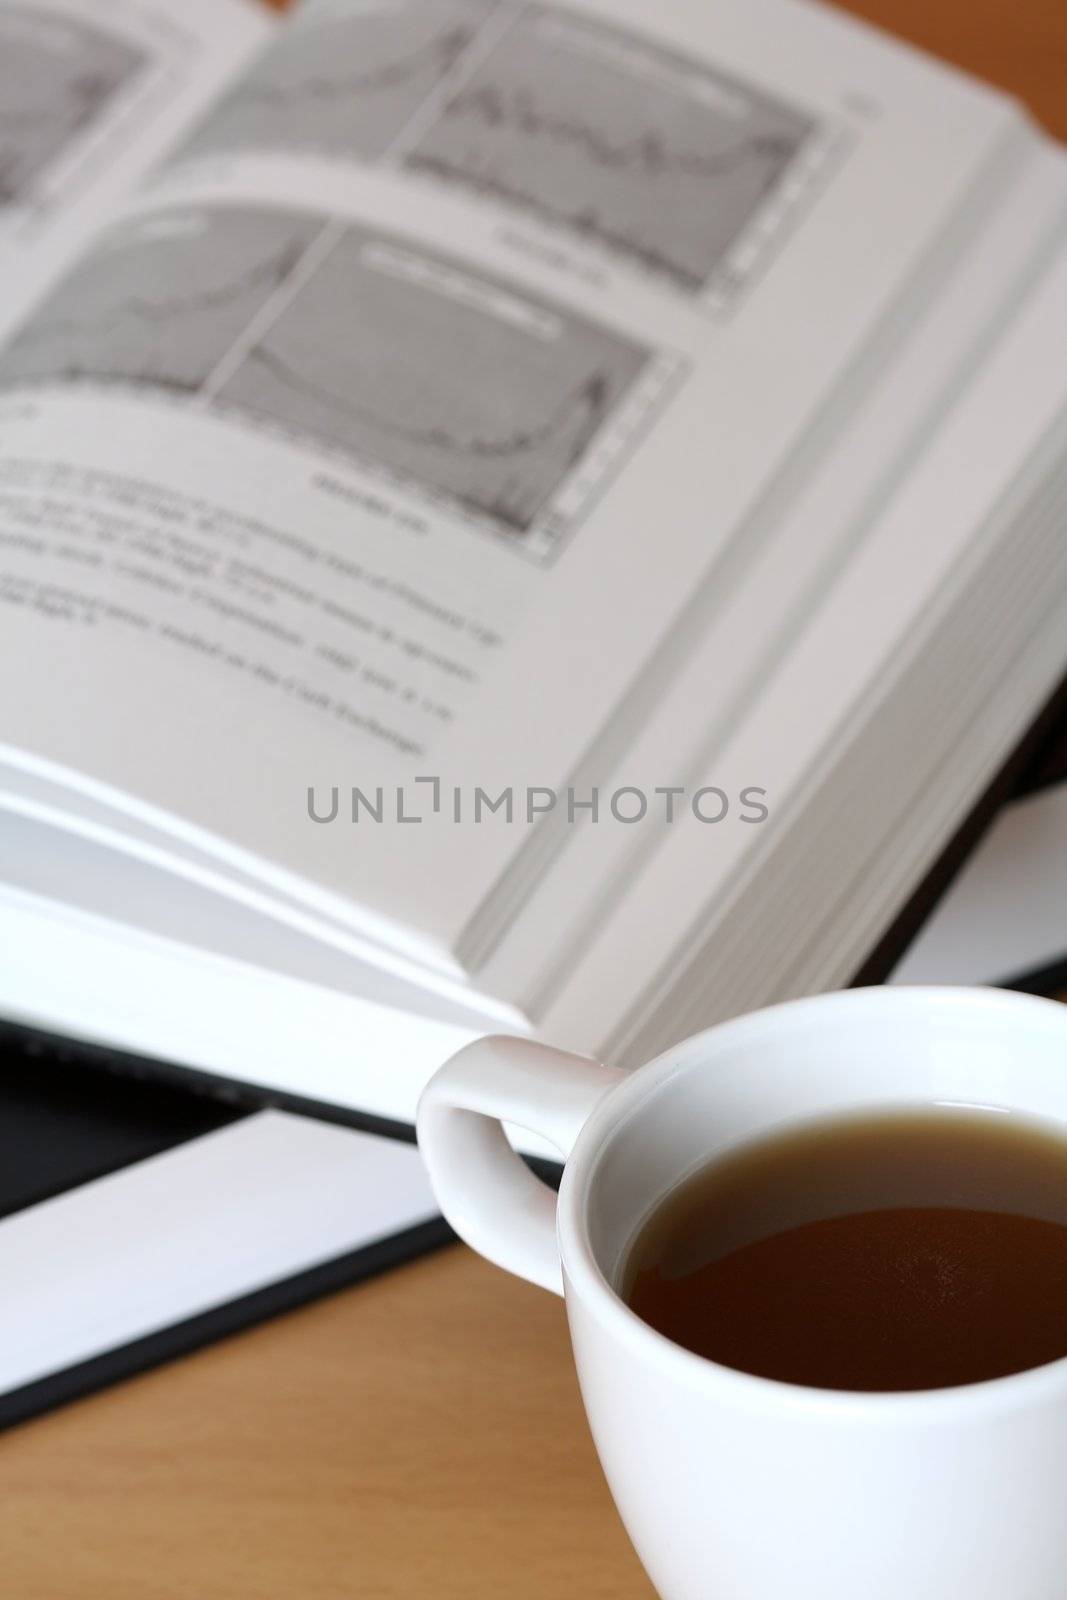 A cup of coffee and an investment book